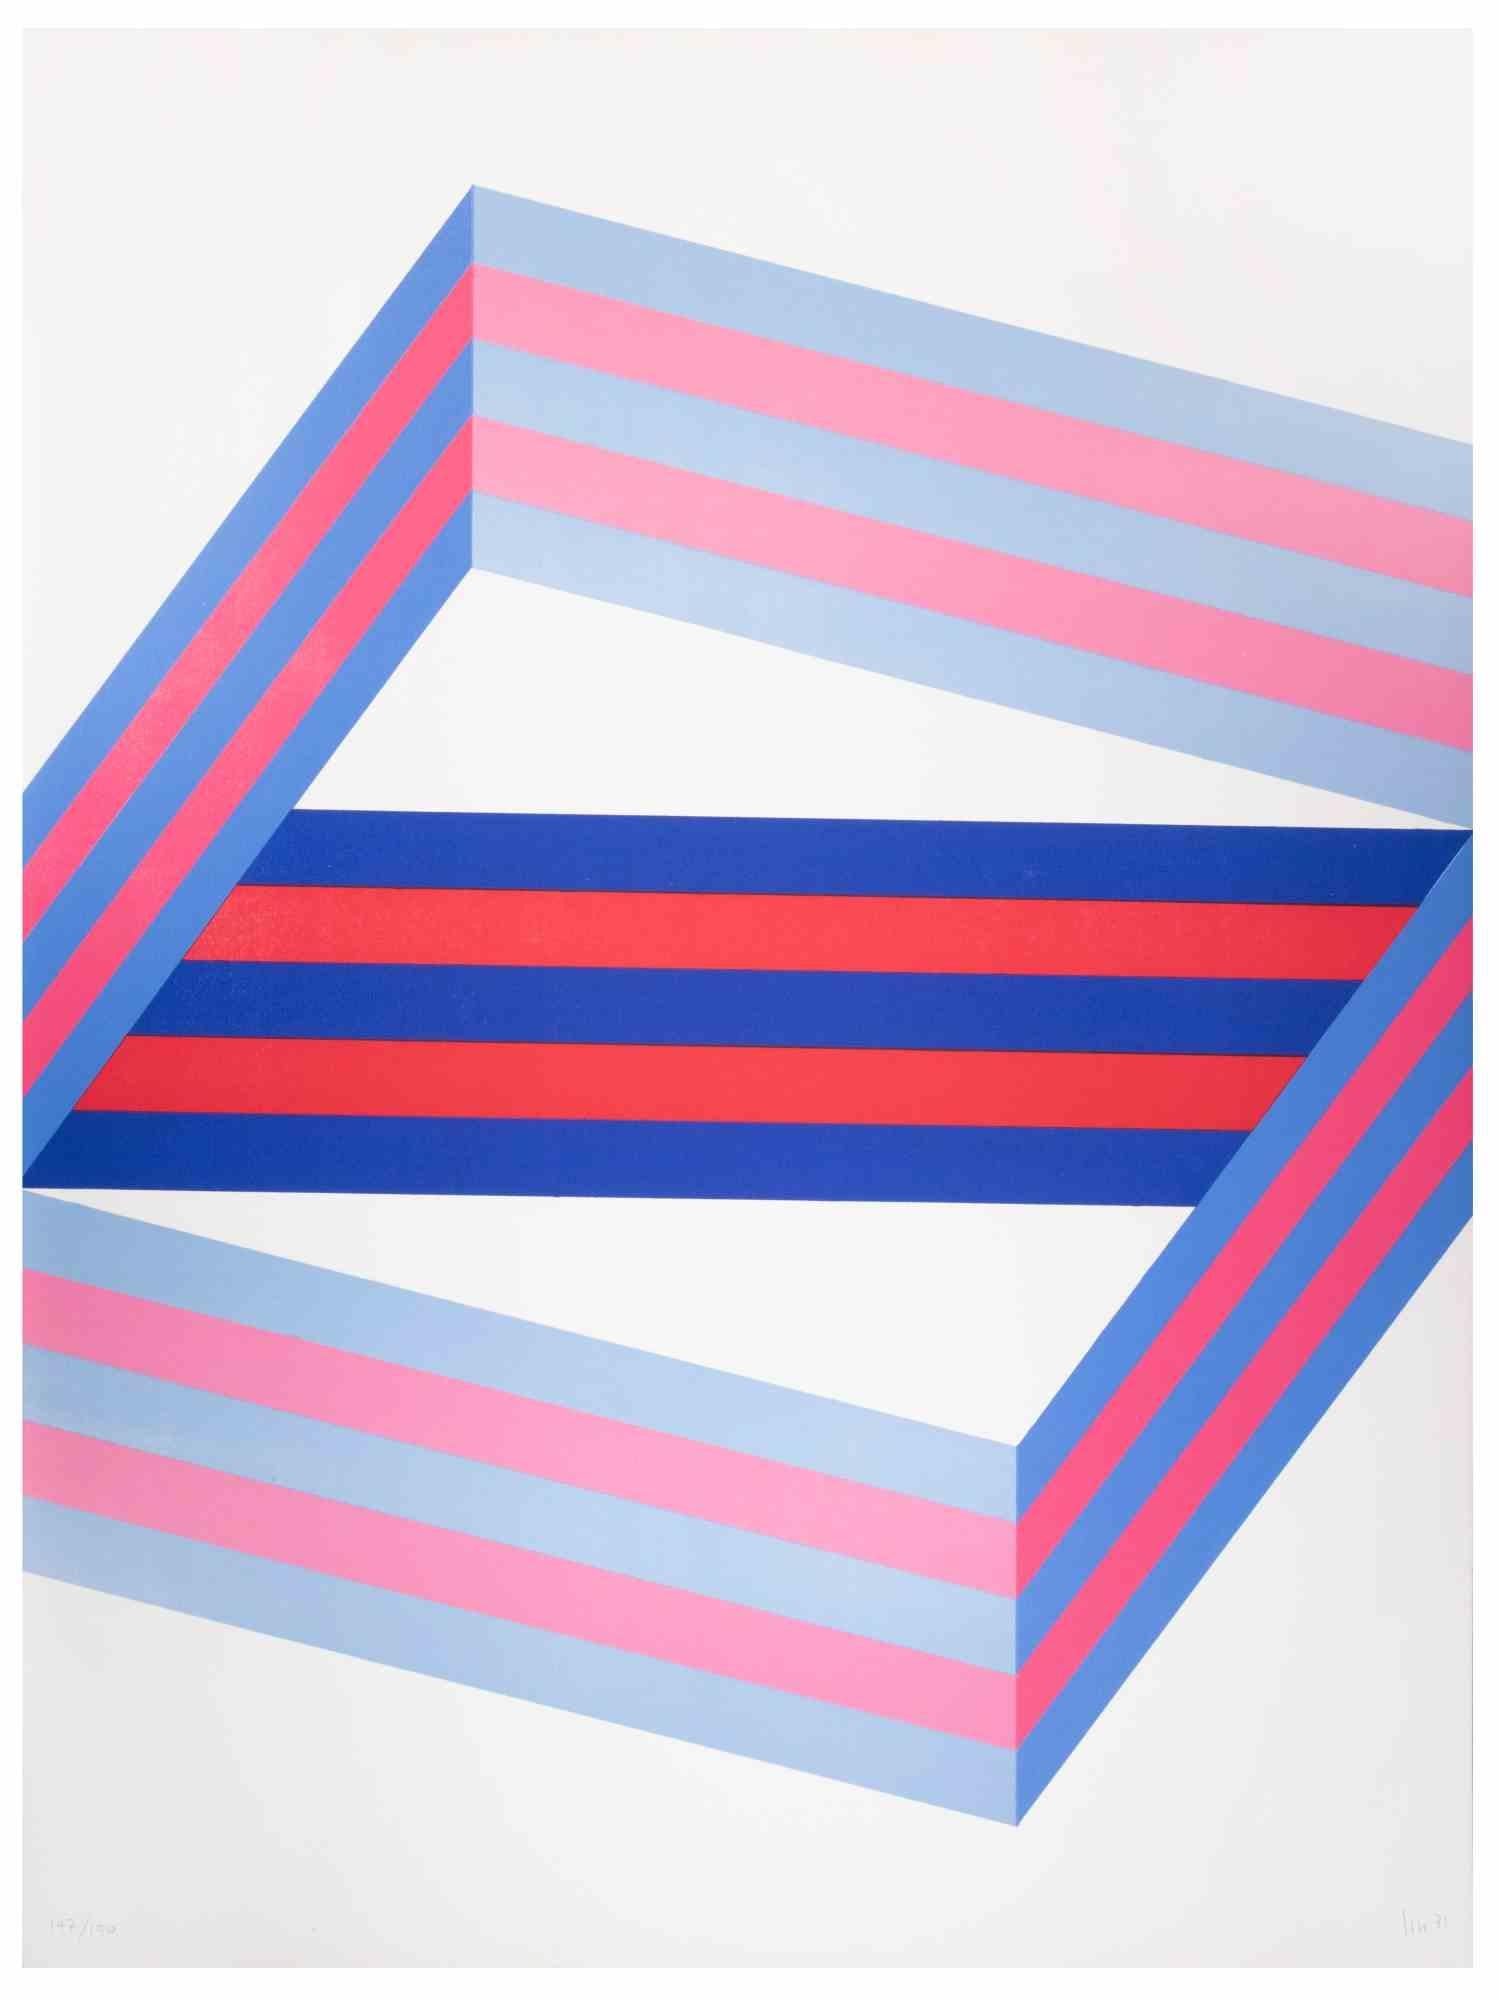 Perspective is a lithograph realized by Renato Livi in 1971.

Hand-signed and dated on the lower right margin.

Numbered on the lower left margin. Edition 147/150

Abstract composition on the tones of blue and pink, harmoniously realised by mastery